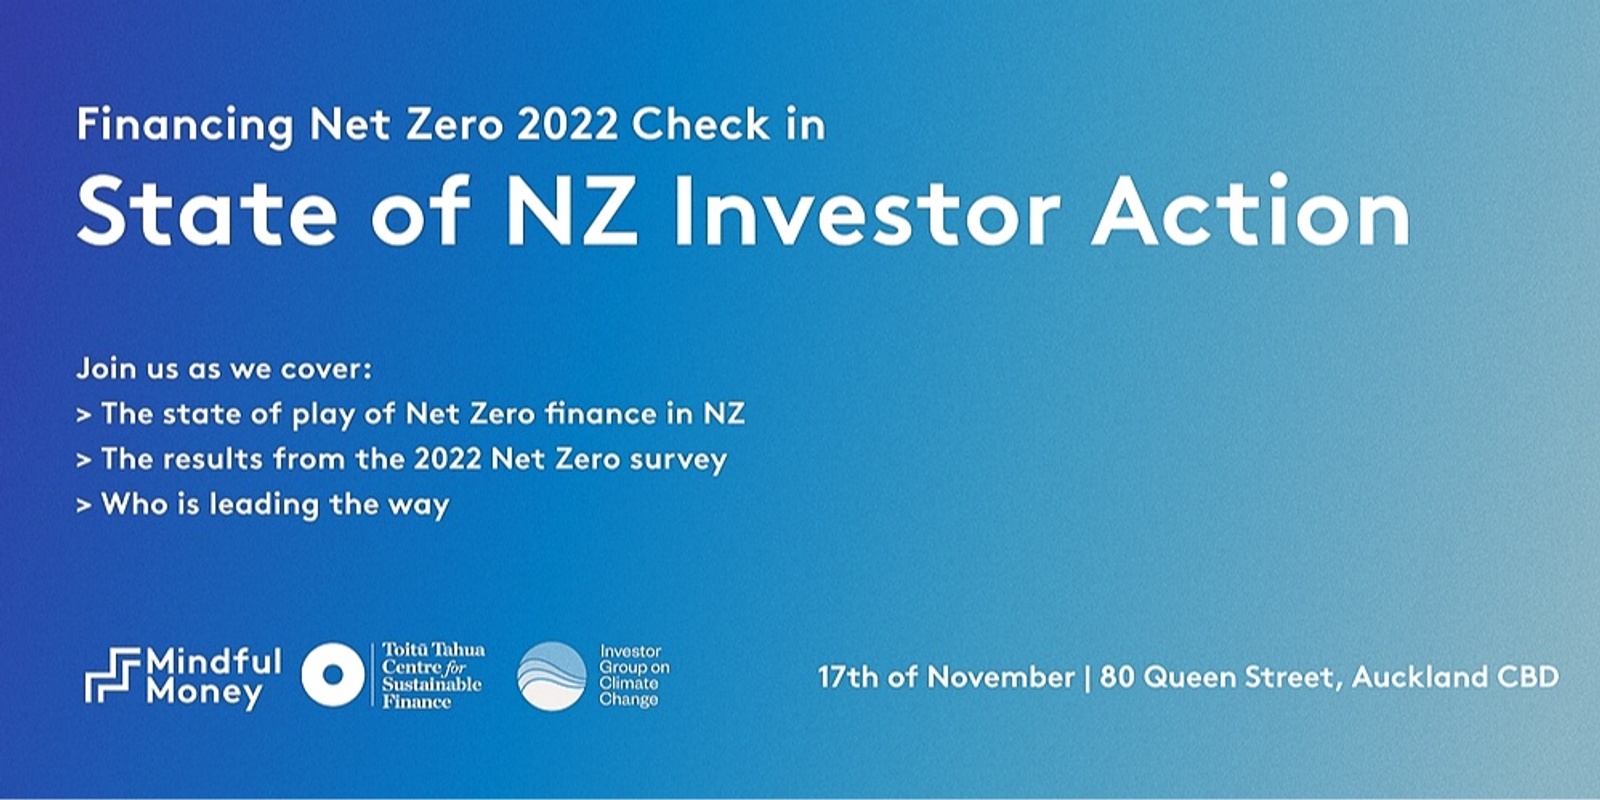 Banner image for Financing Net Zero Check in 2022